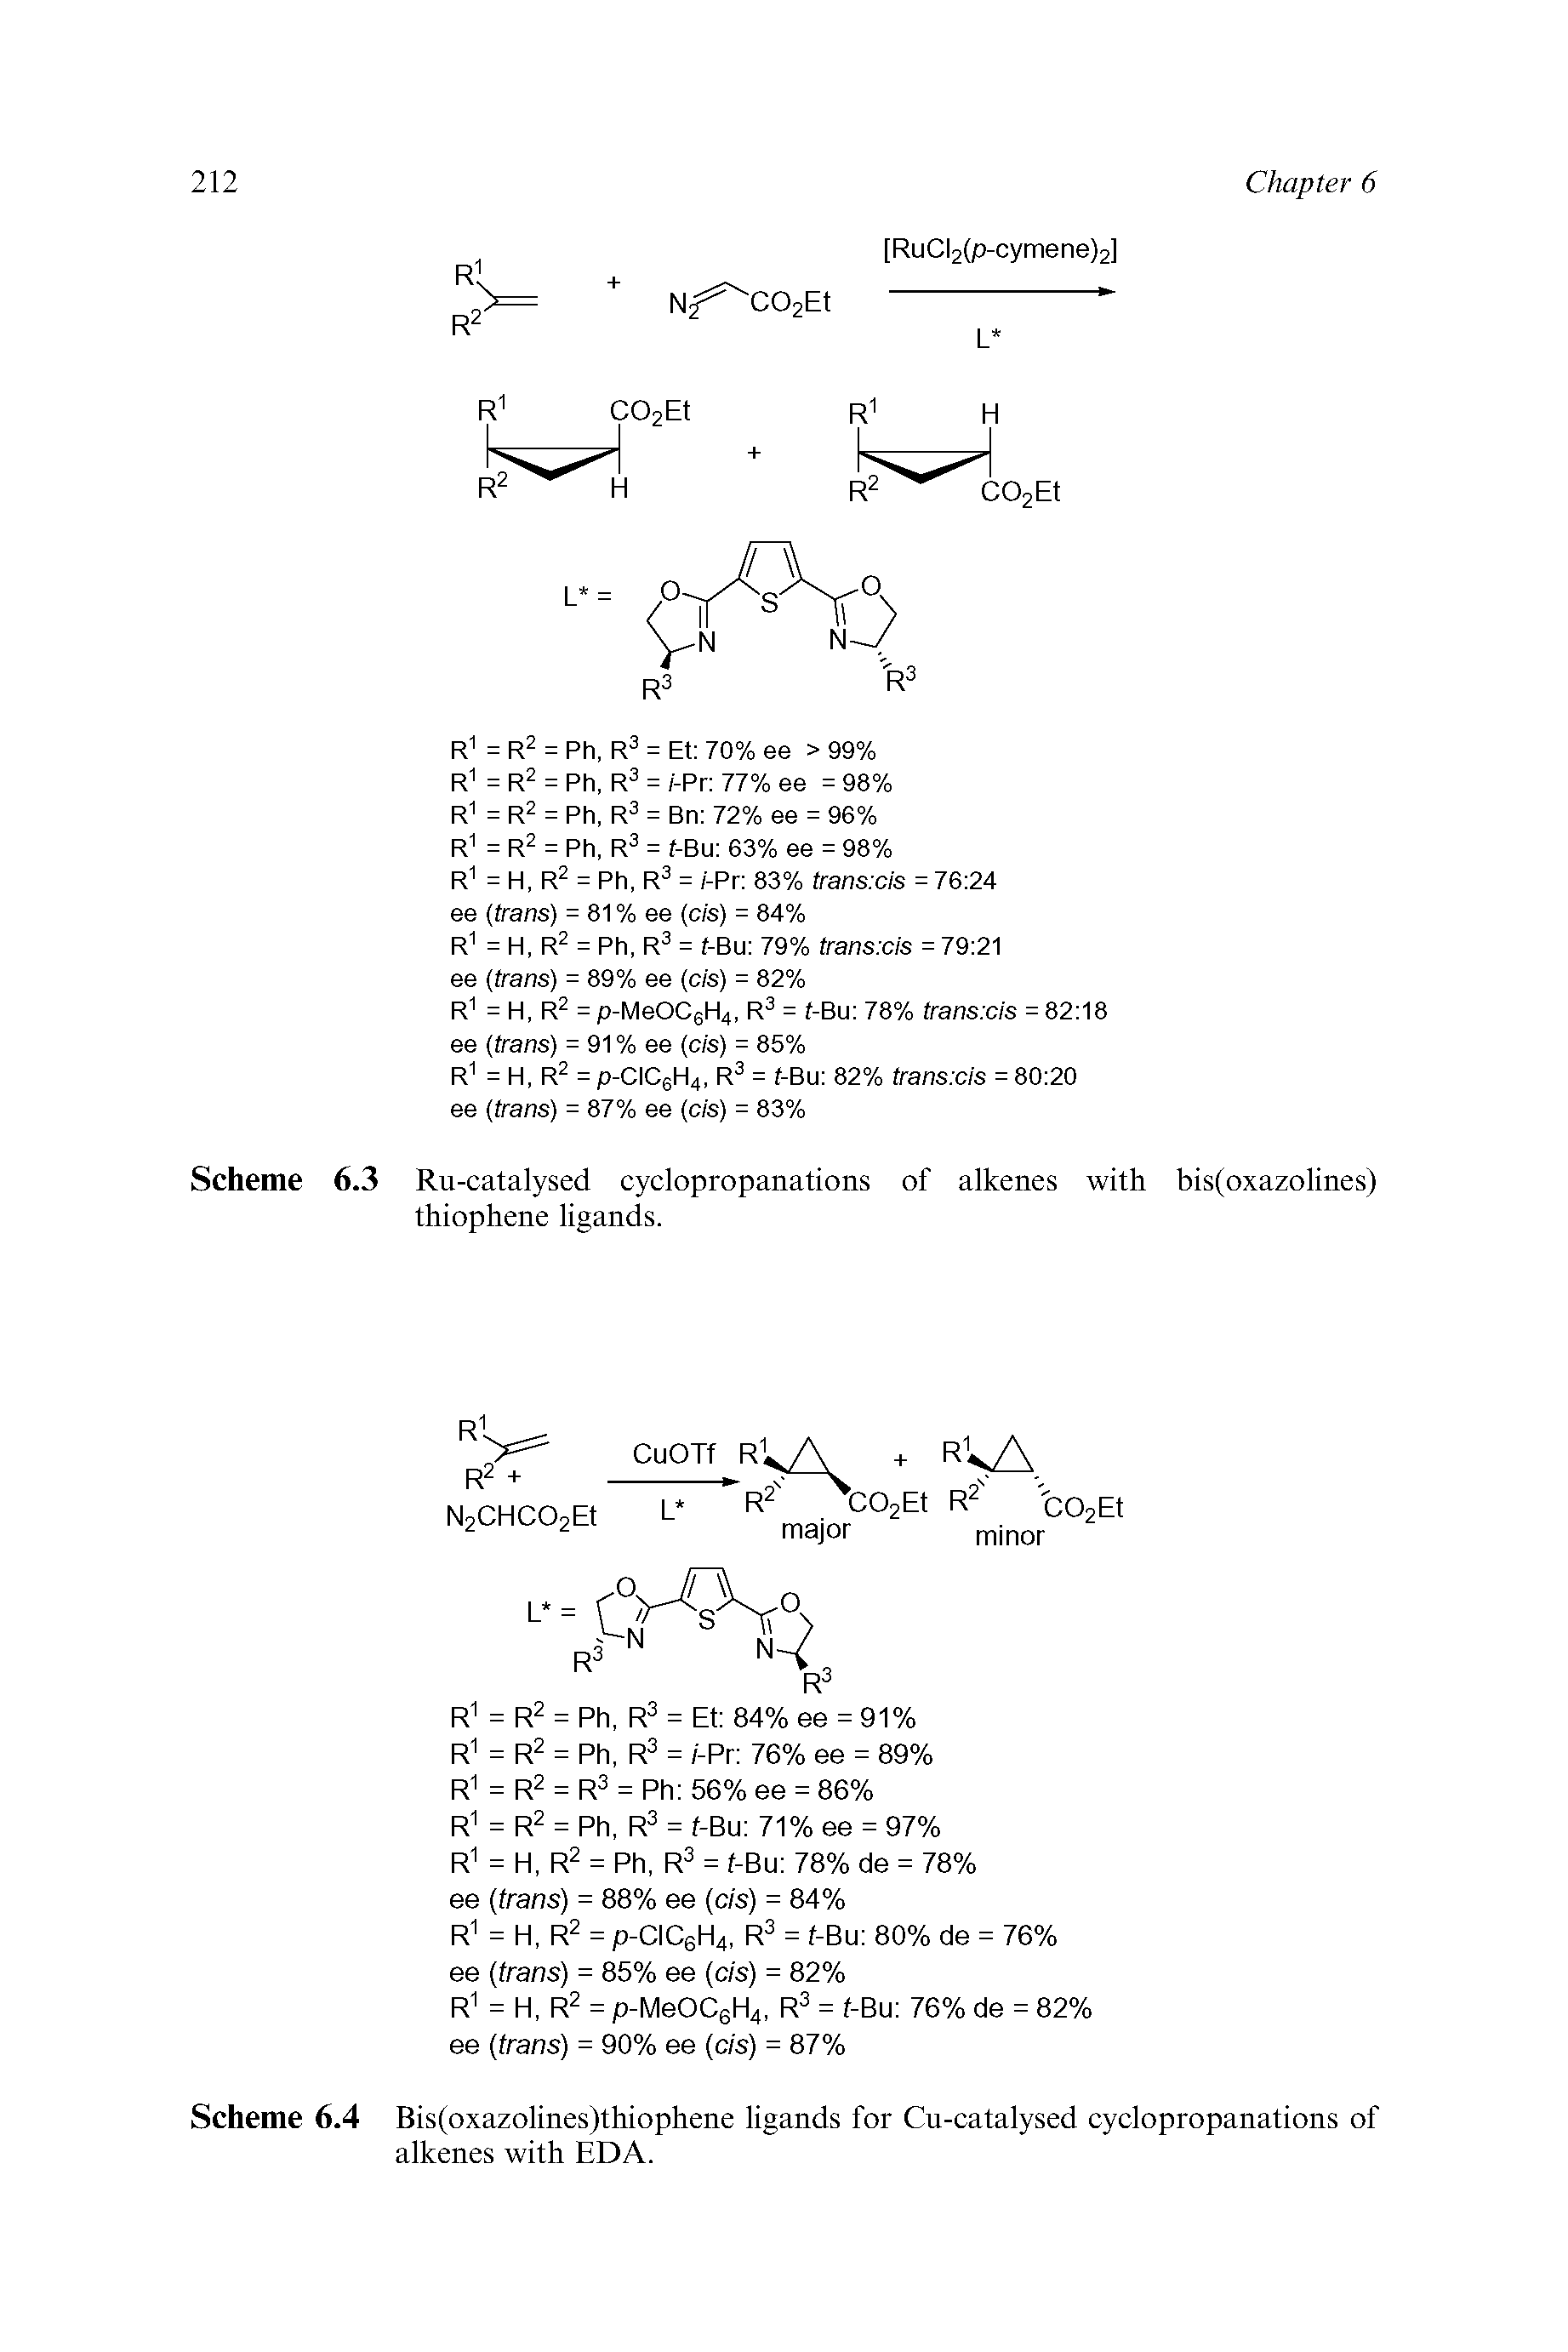 Scheme 6.4 Bis(oxazolines)thiophene ligands for Cu-catalysed cyclopropanations of alkenes with EDA.